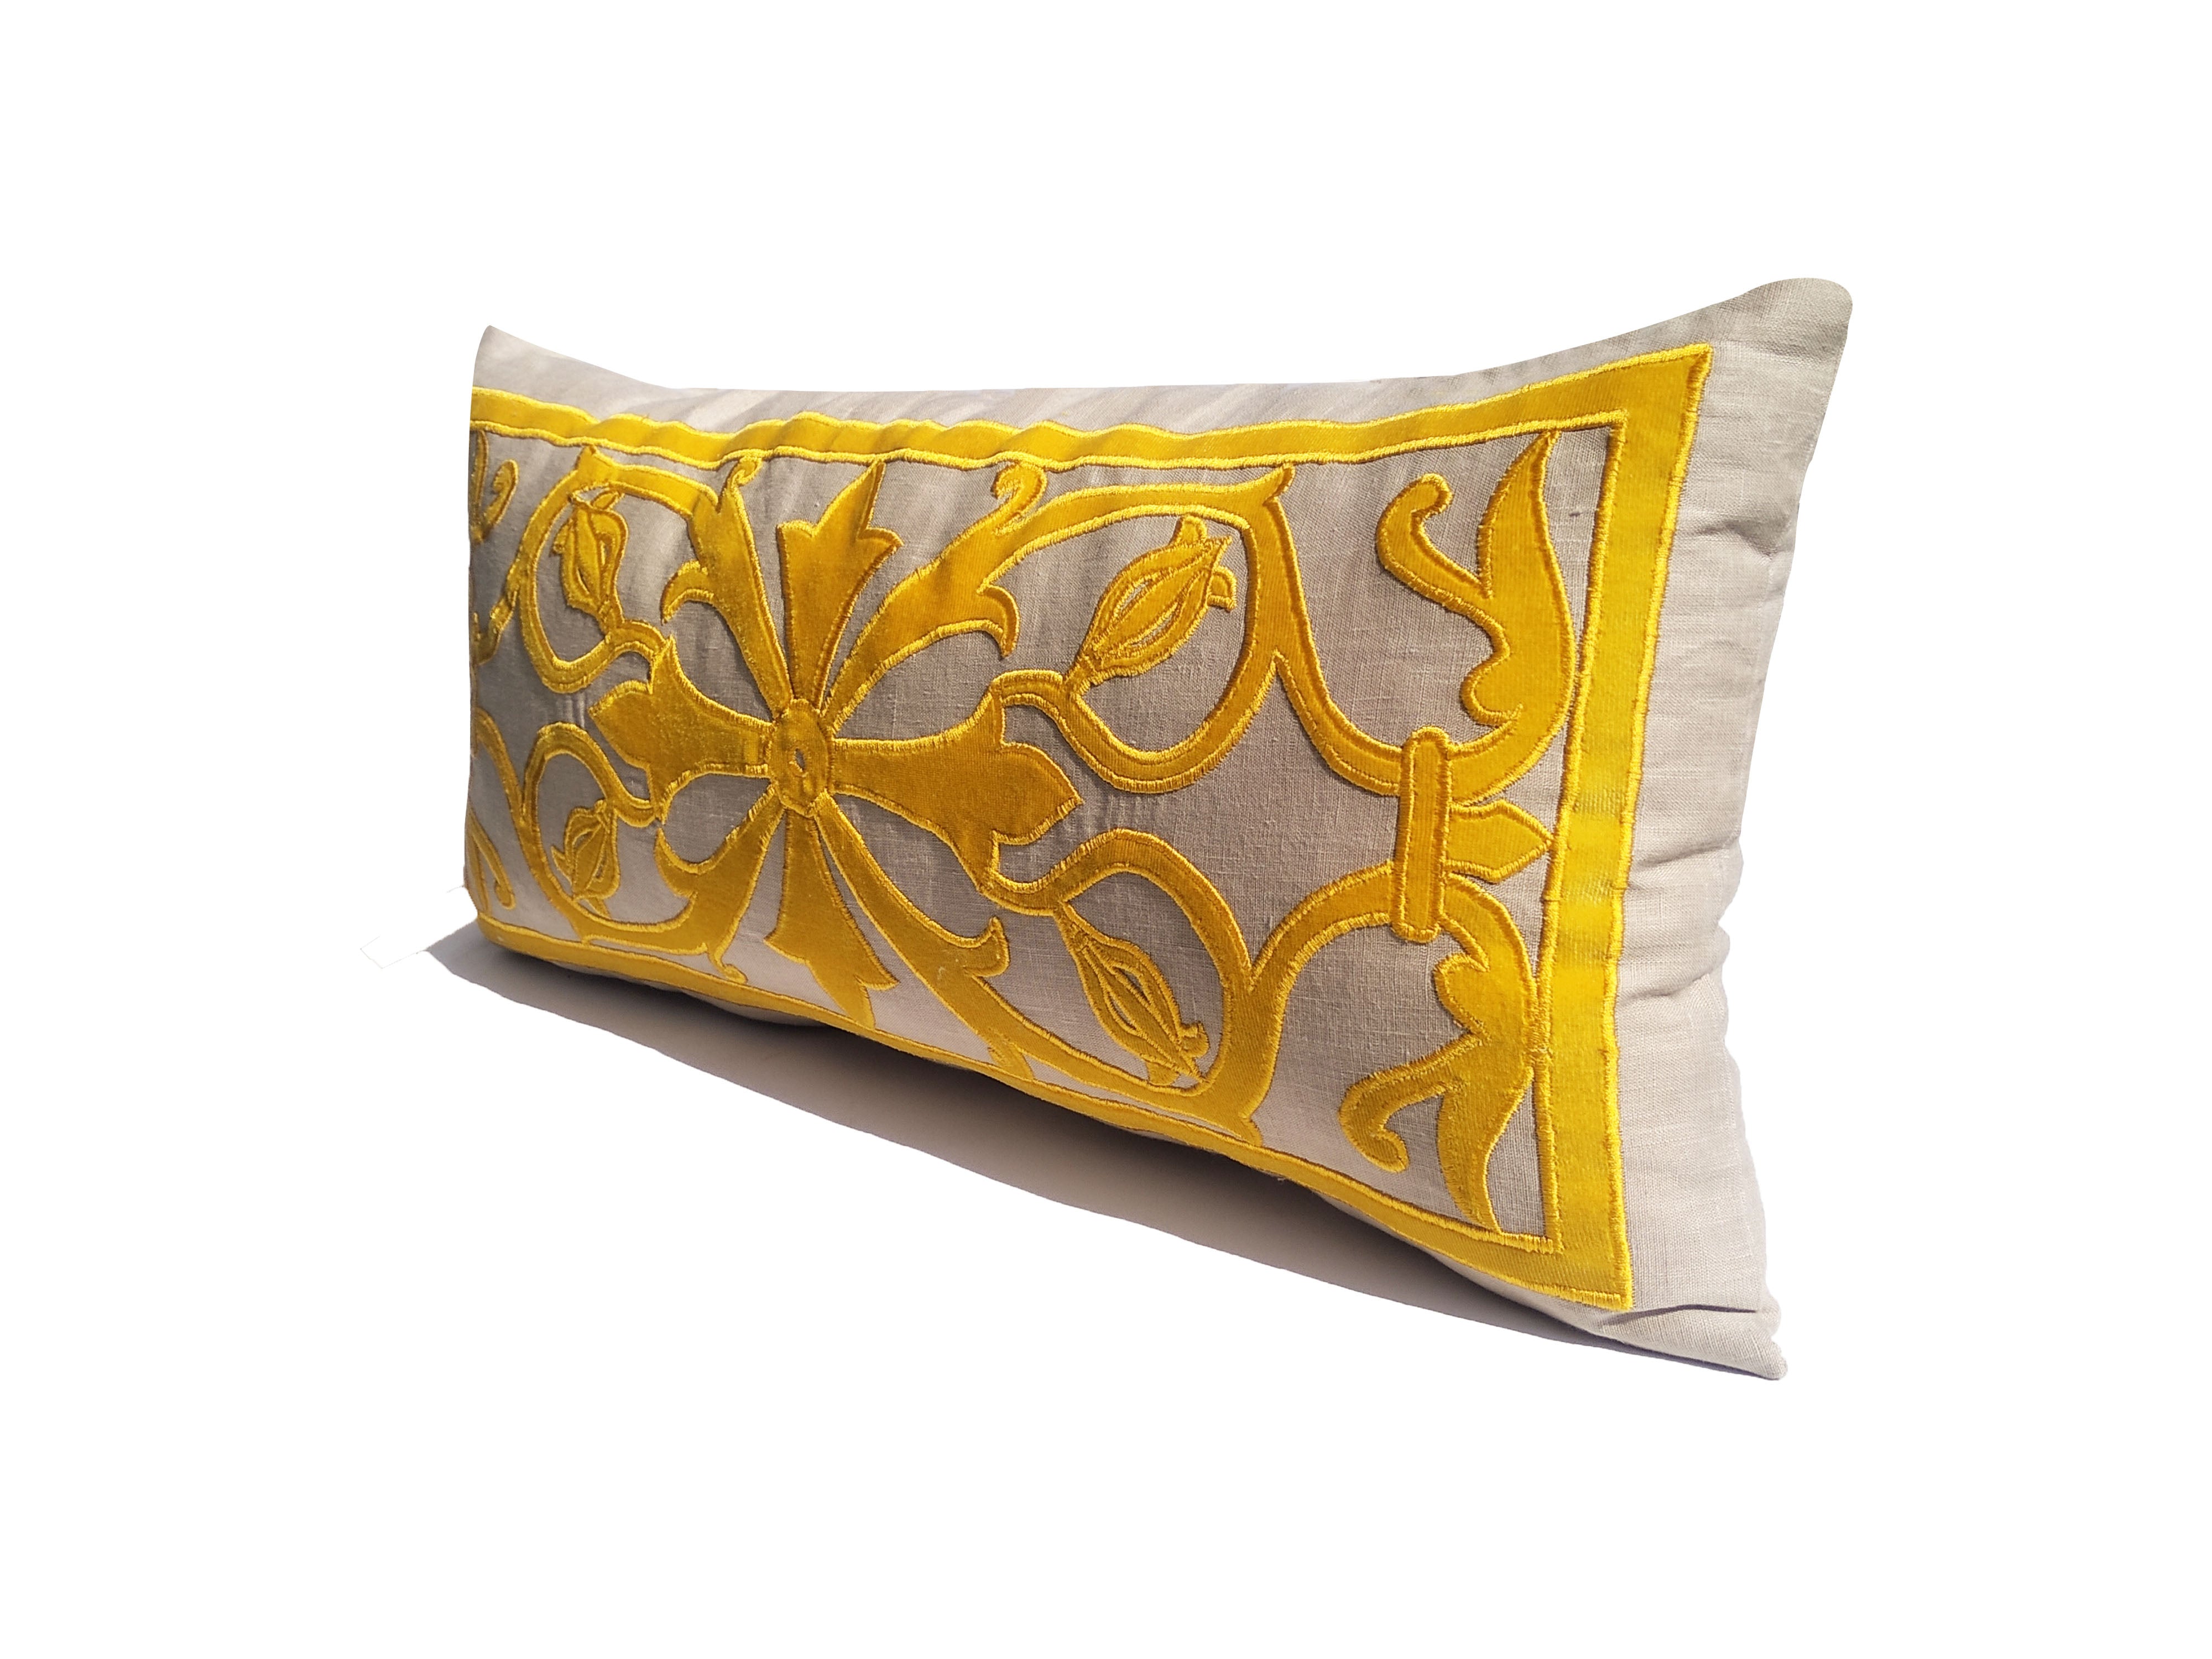 Amore Beaute Grey linen pillow cover with yellow velvet pillow to create a textured floral pattern.